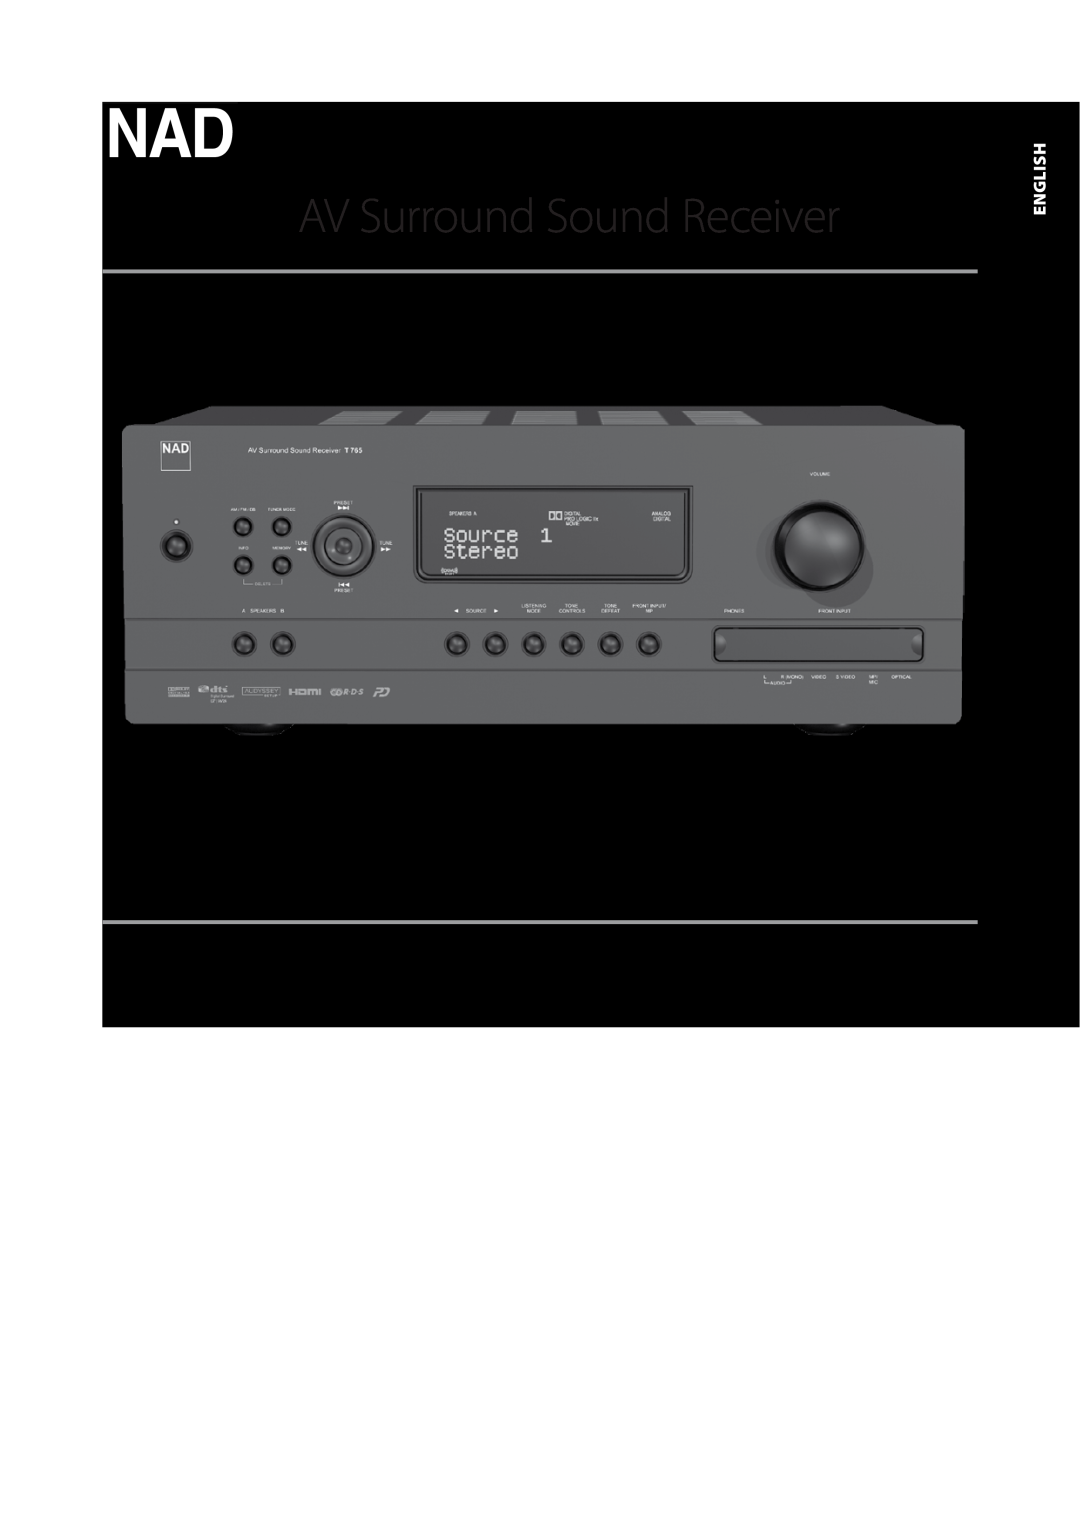 NAD T 765 owner manual English, AV Surround Sound Receiver, Owner’s Manual 